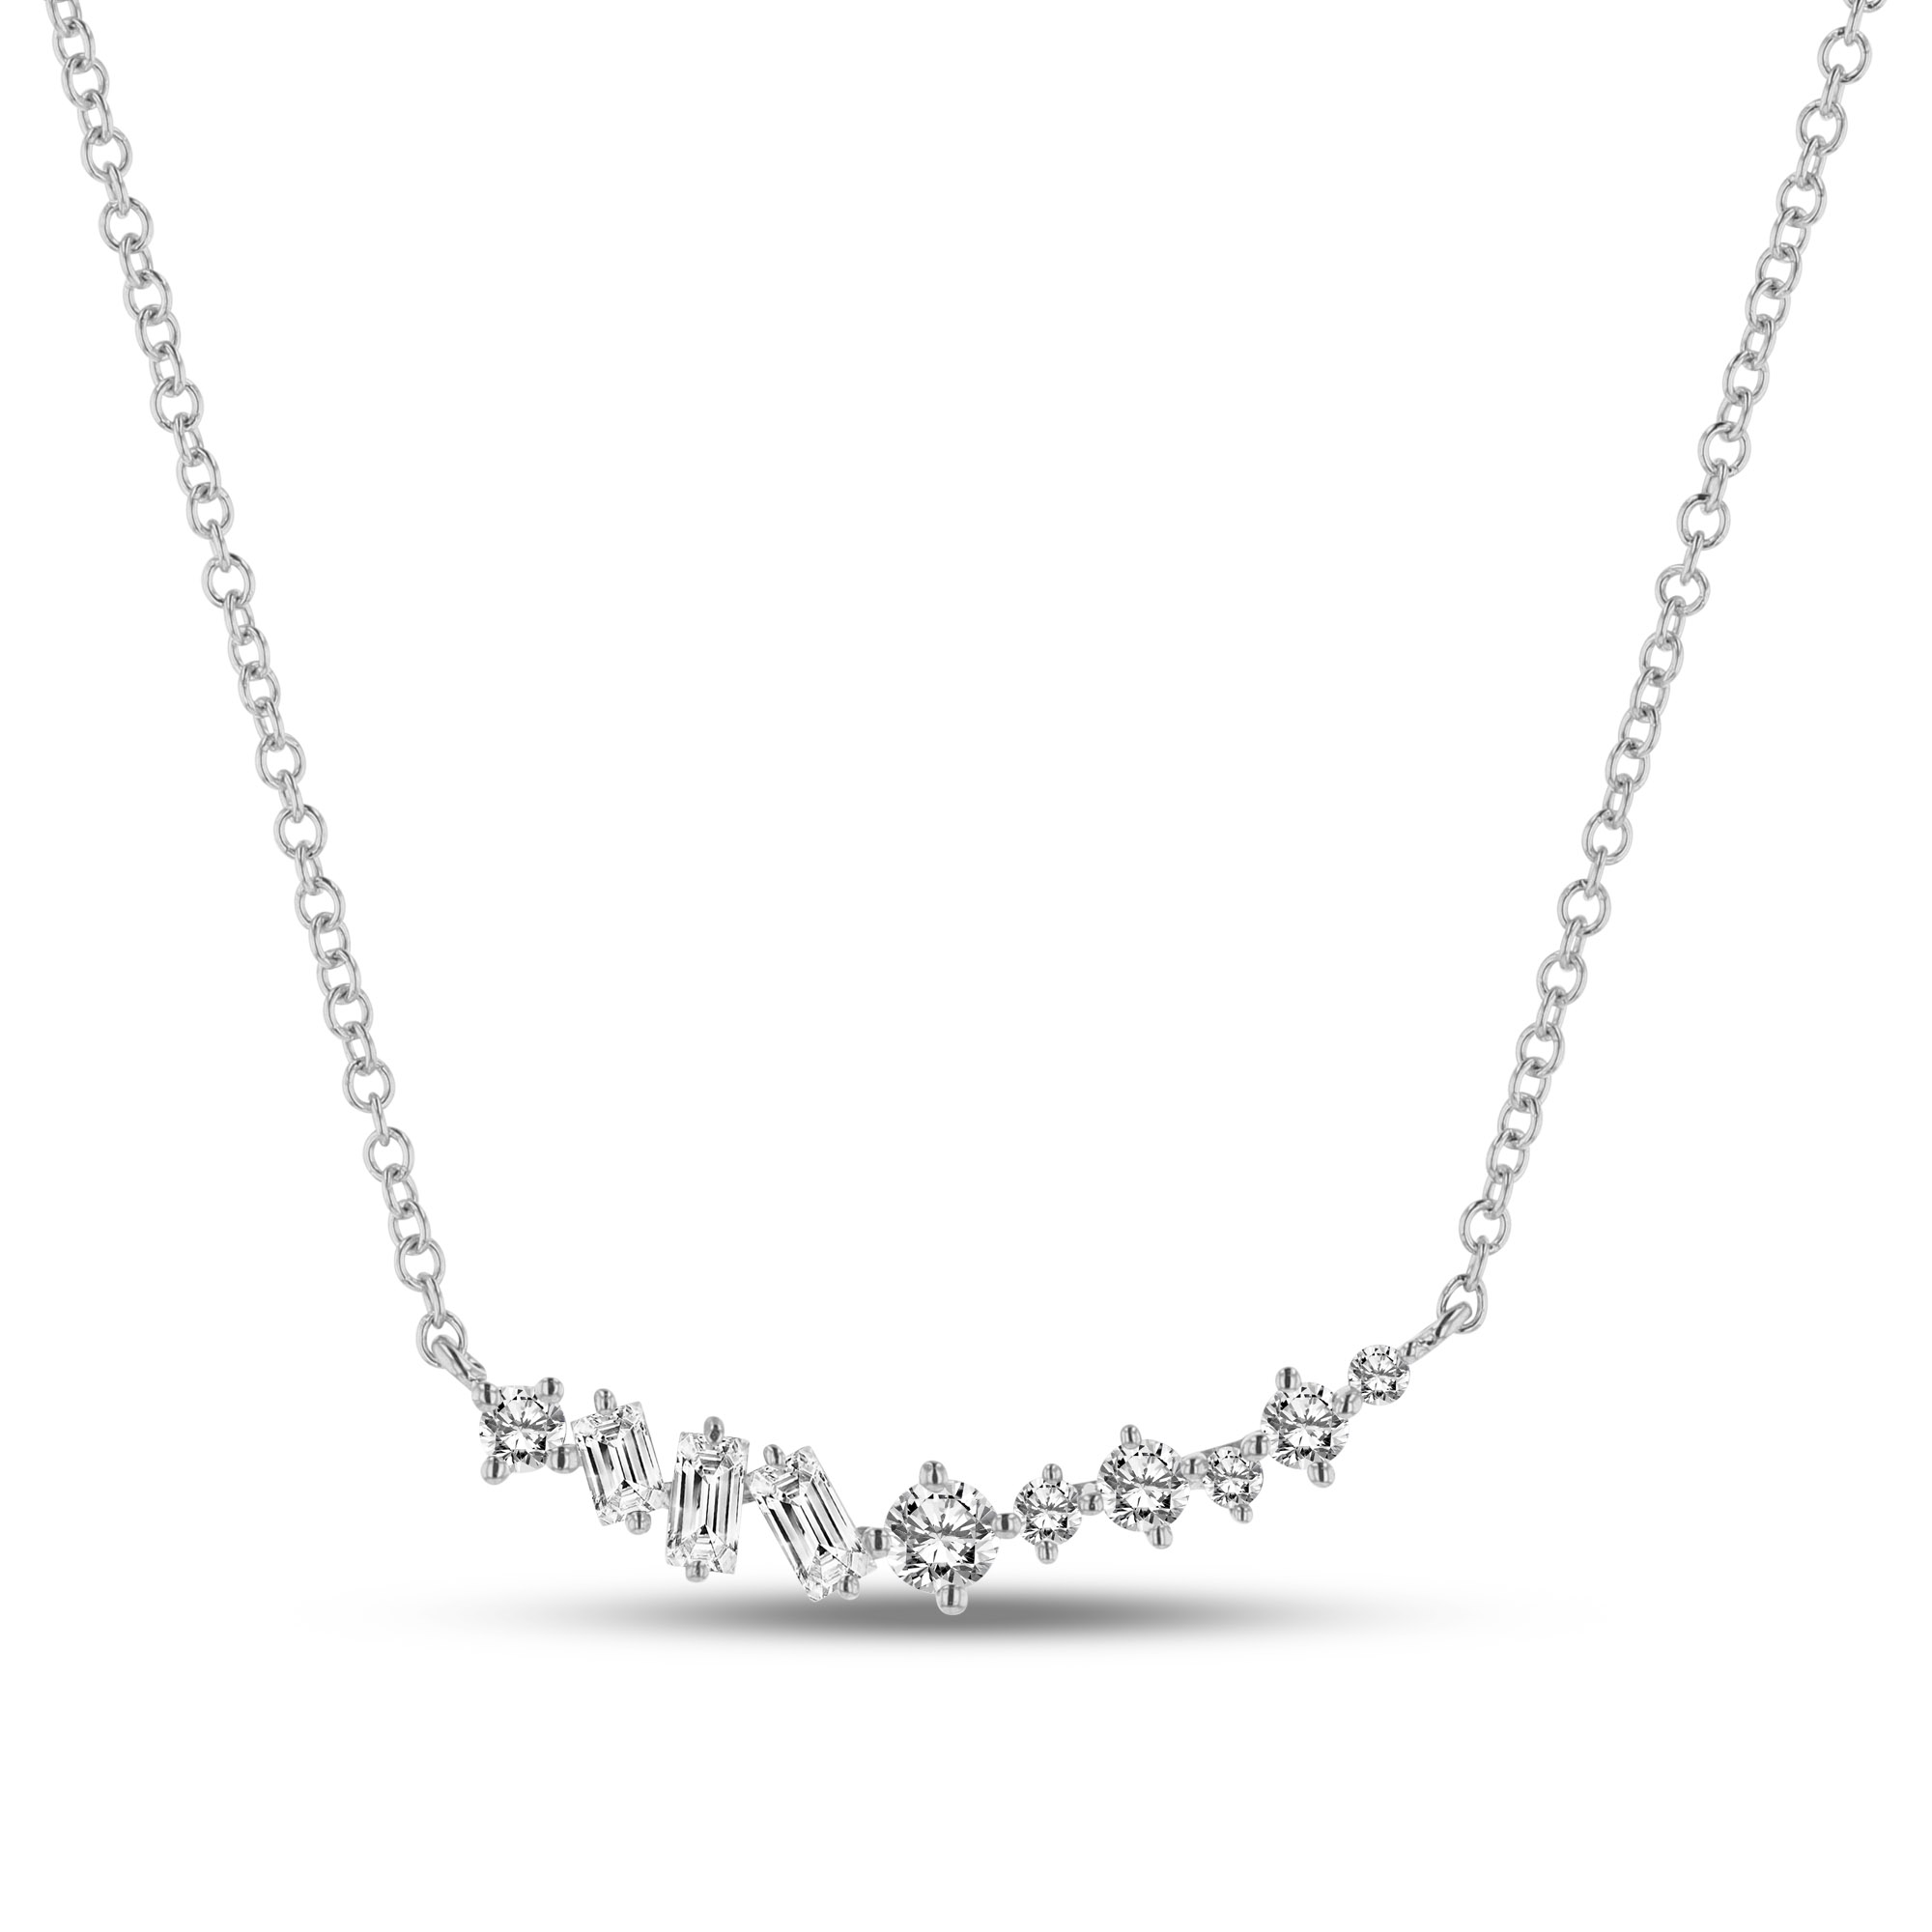 View 0.15ctw Round and Baguette Diamond Necklace in 14k White Gold